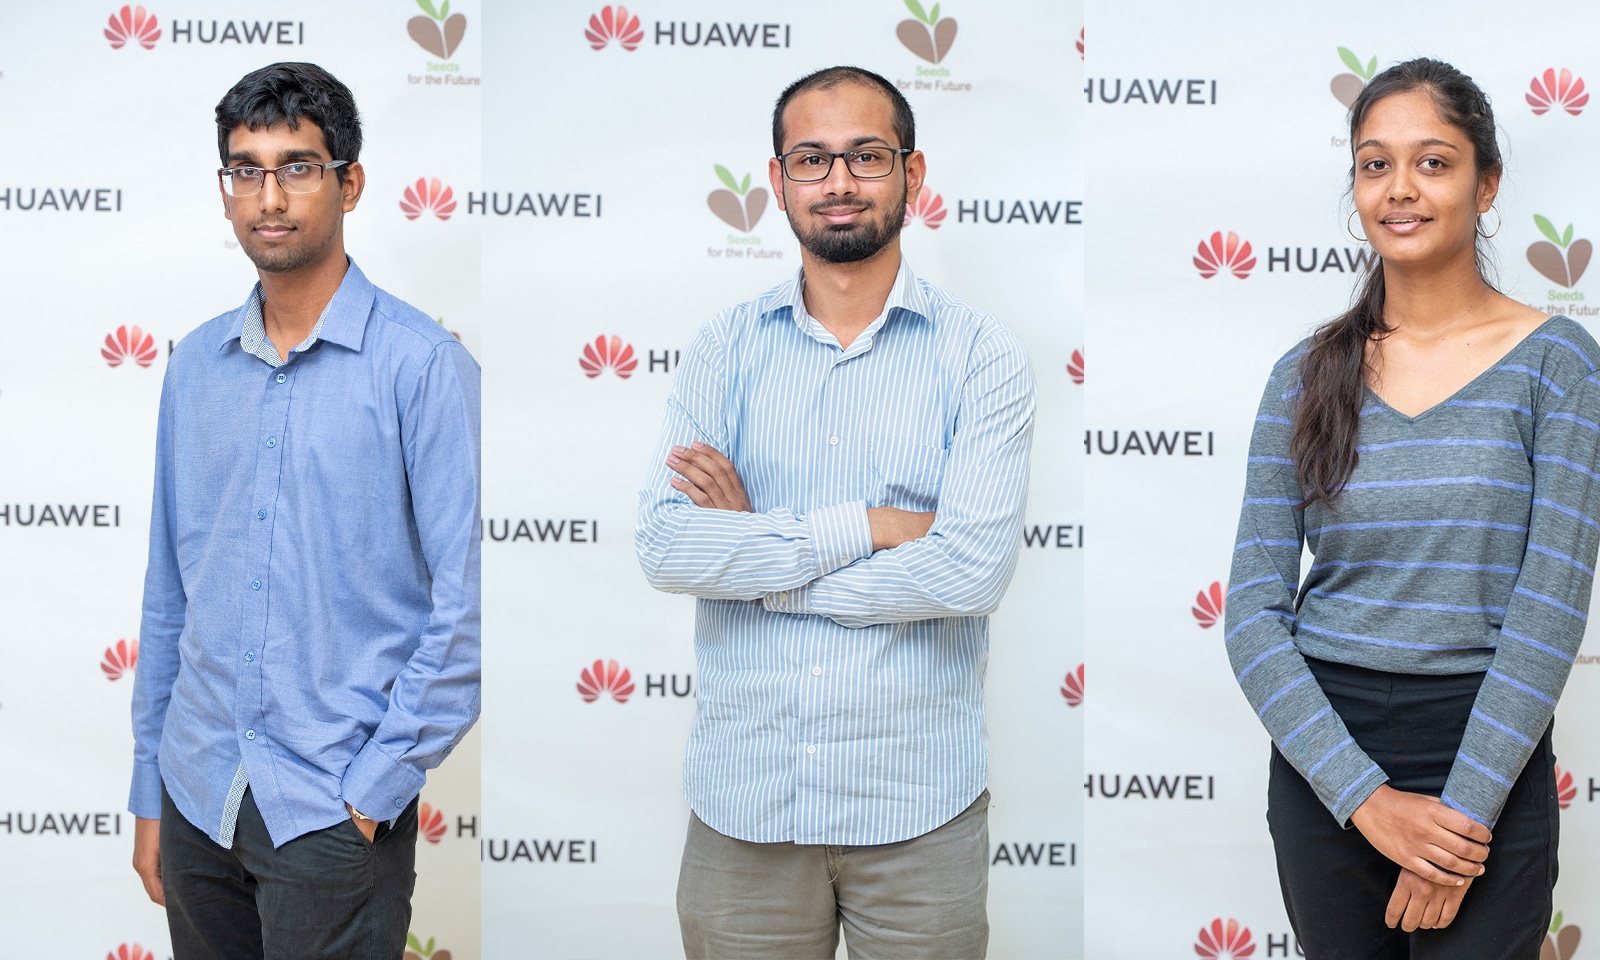 Huawei ICT Competition